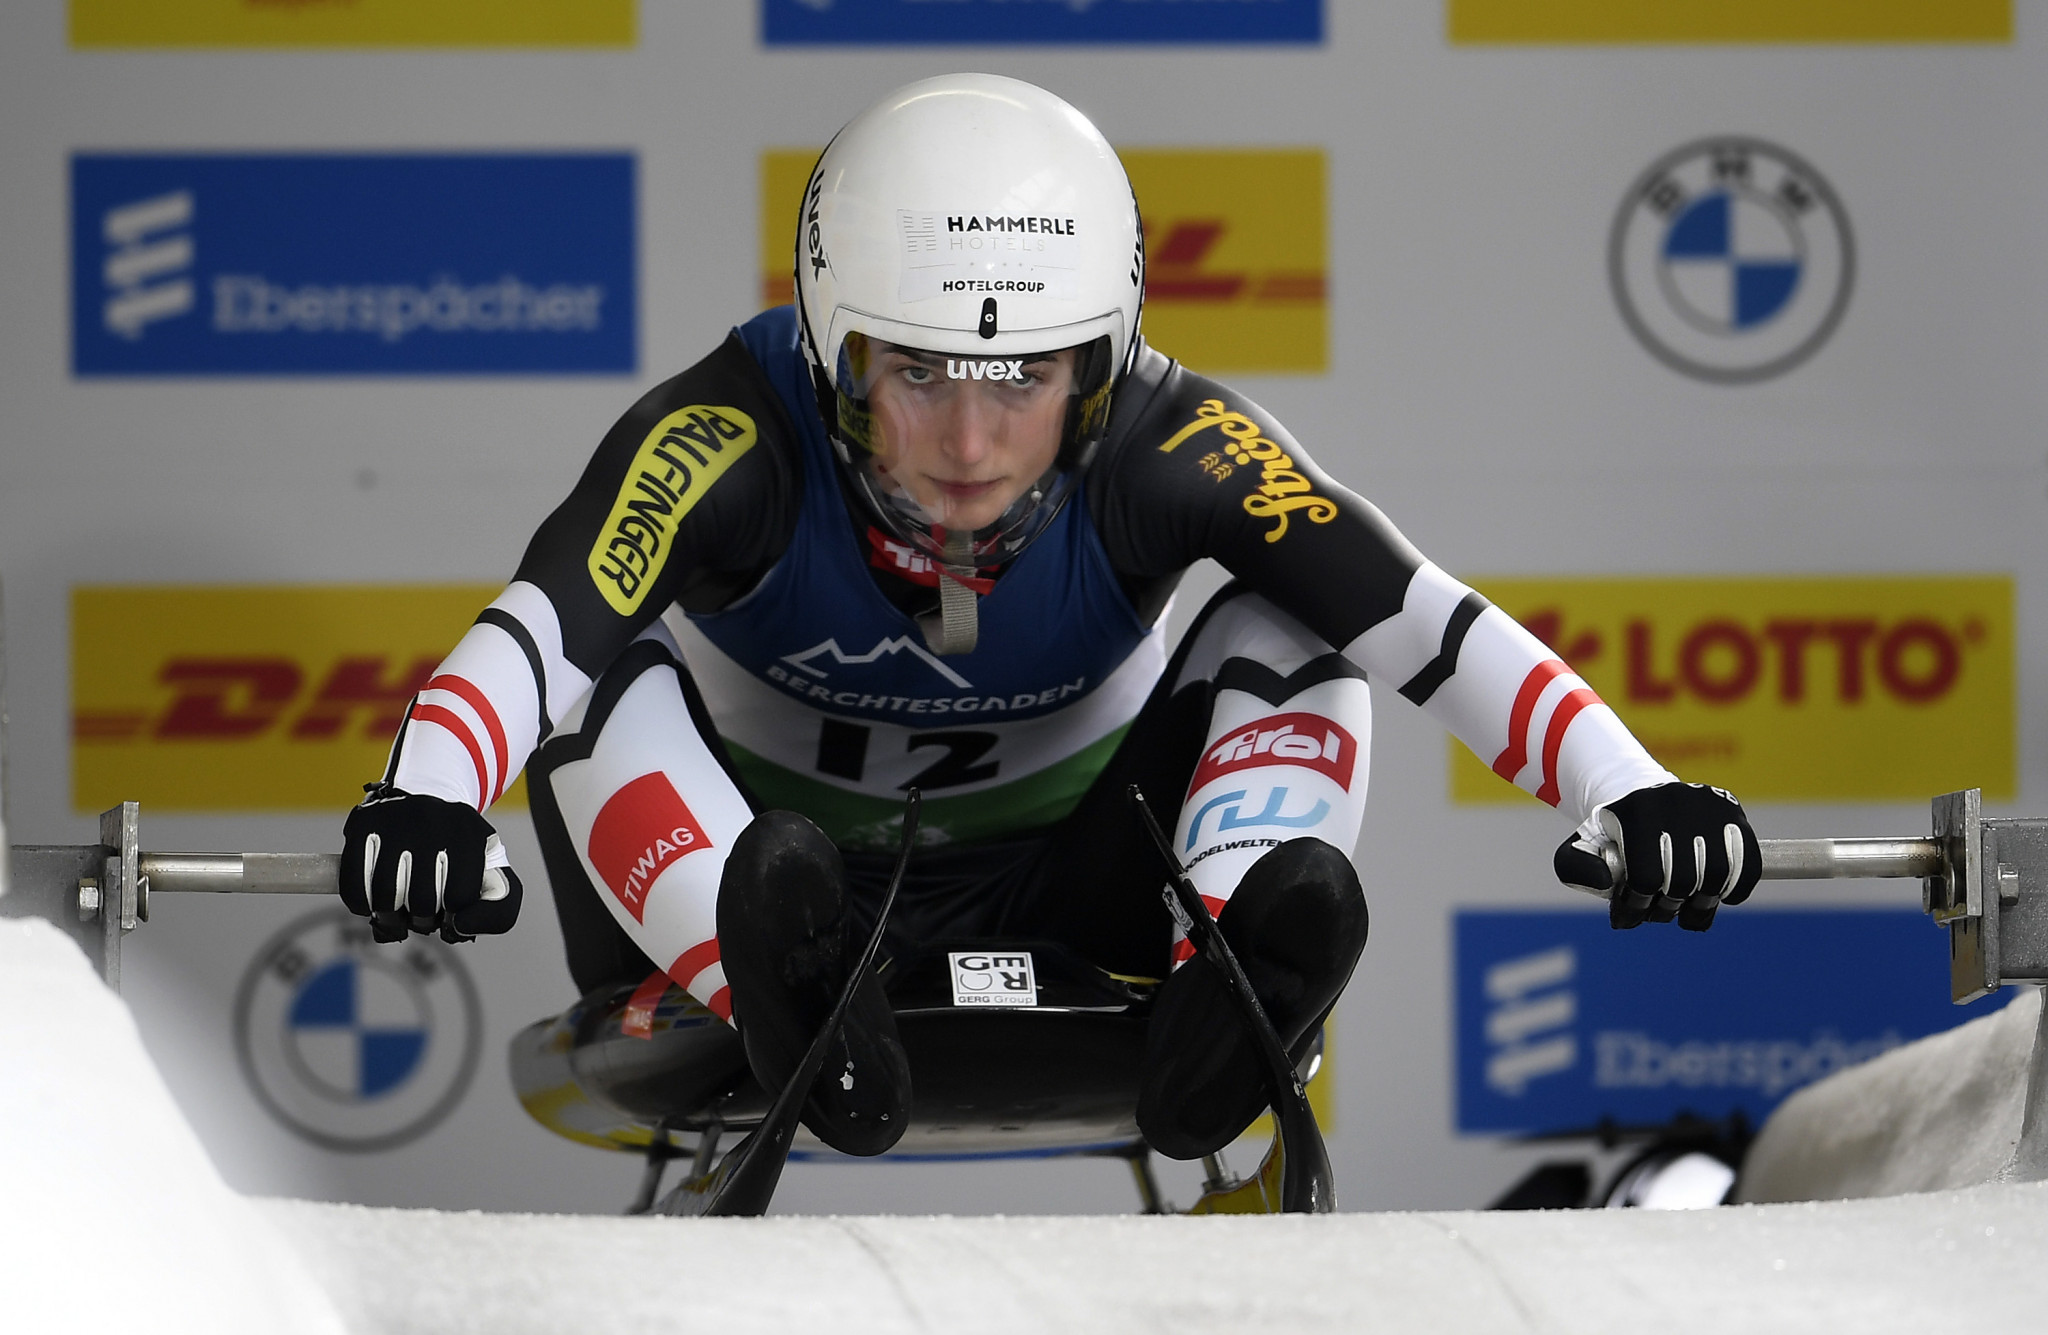 Madeleine Egle believes her experience at the Lillehammer 2016 Winter Youth Olympics set her up perfectly to medal at the senior Games ©Getty Images